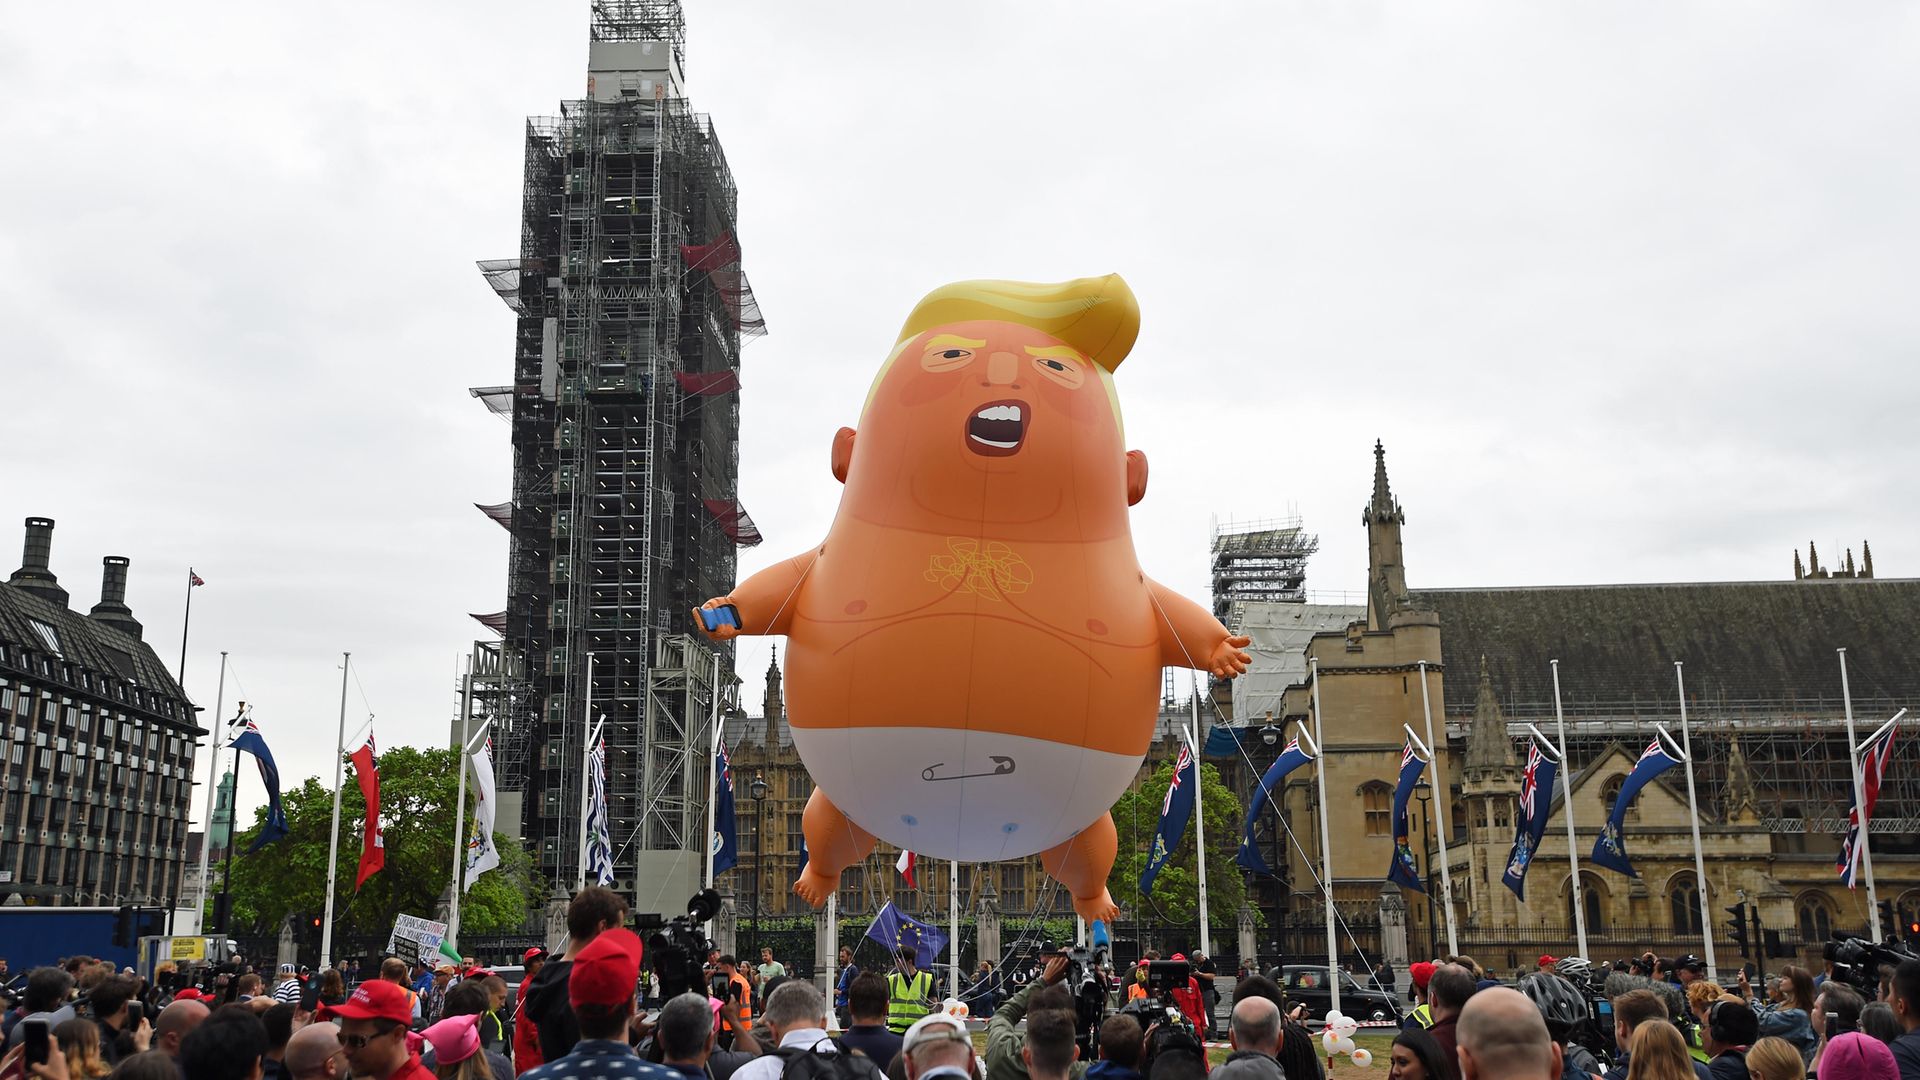 The Donald Trump baby blimp set up in Parliament Square, London, which has been "consigned to history" at the Museum of London. - Credit: PA